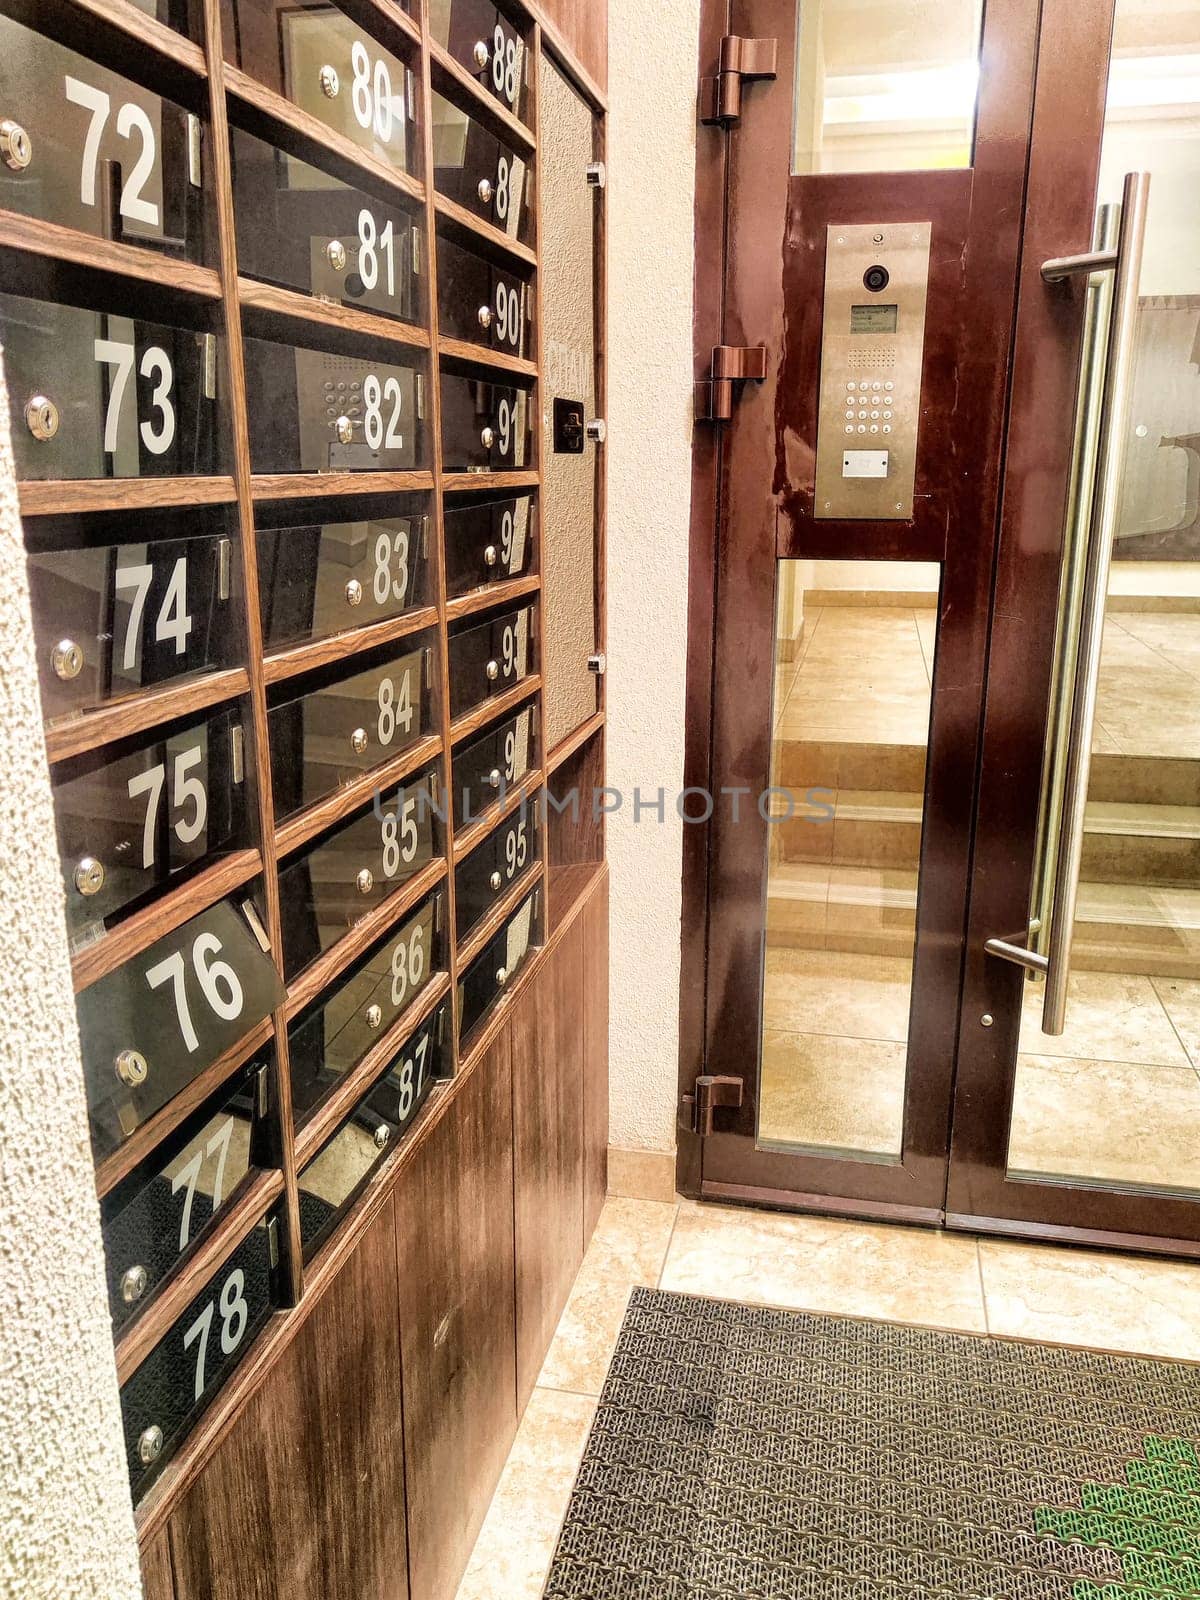 Mailboxes in hallway or entrance. Hallway featuring numbered mailboxes next to glass doors. Residential Building Entrance With Modern Mailboxes